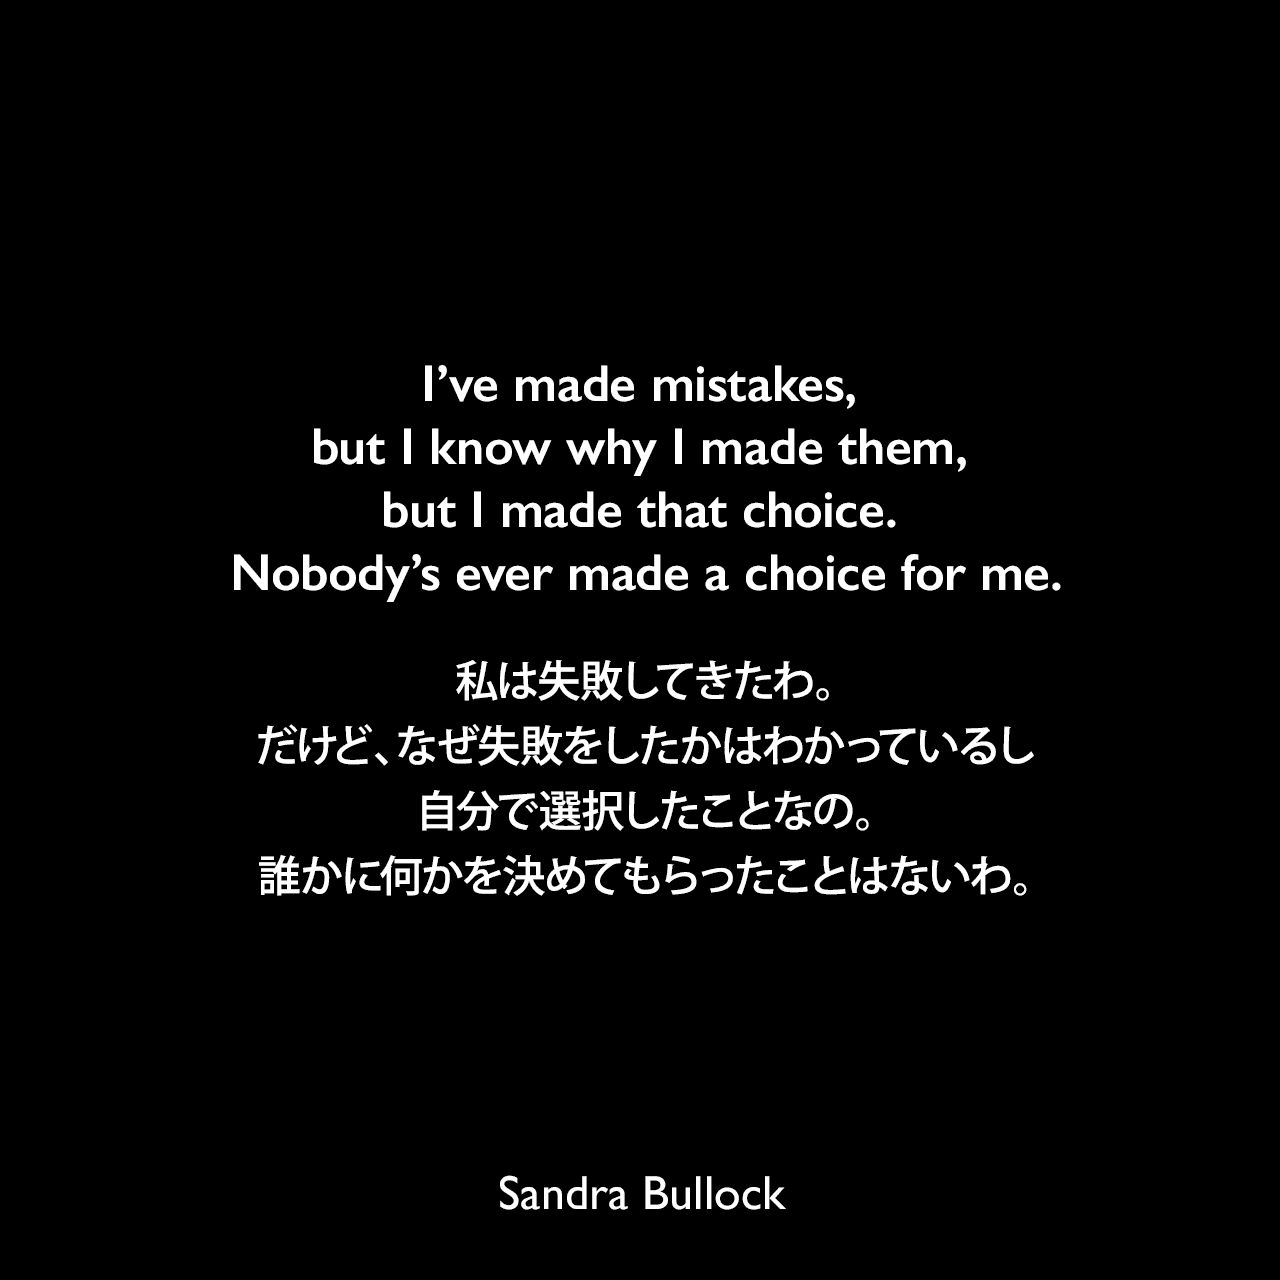 I’ve made mistakes, but I know why I made them, but I made that choice. Nobody’s ever made a choice for me.私は失敗してきたわ。だけど、なぜ失敗をしたかはわかっているし、自分で選択したことなの。誰かに何かを決めてもらったことはないわ。Sandra Bullock